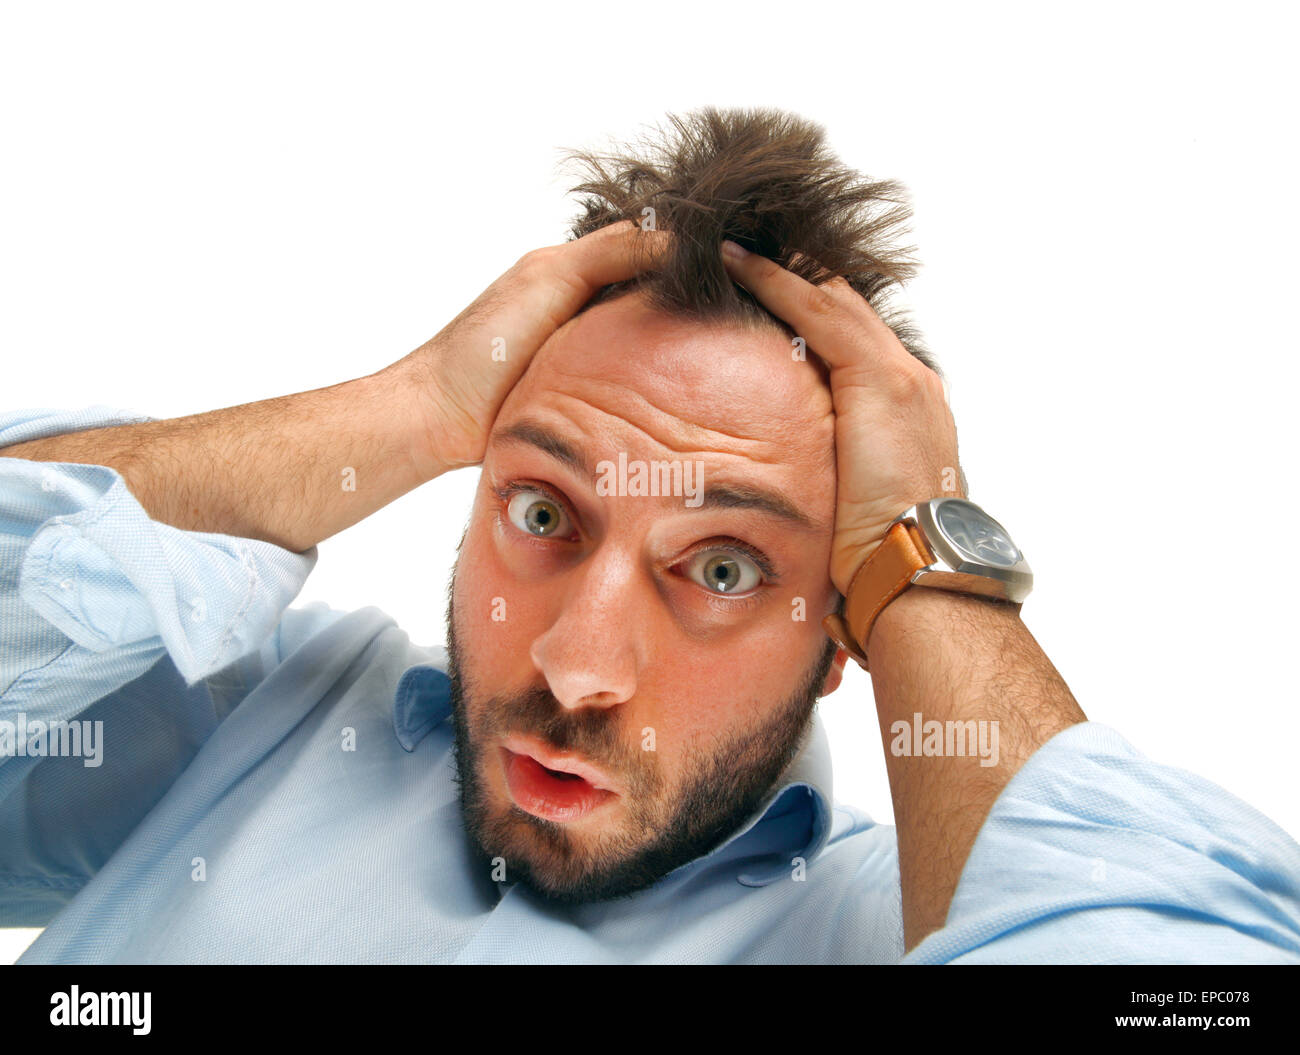 Stressed man tear his hair out, crazy face expression, isolated on white. Stock Photo